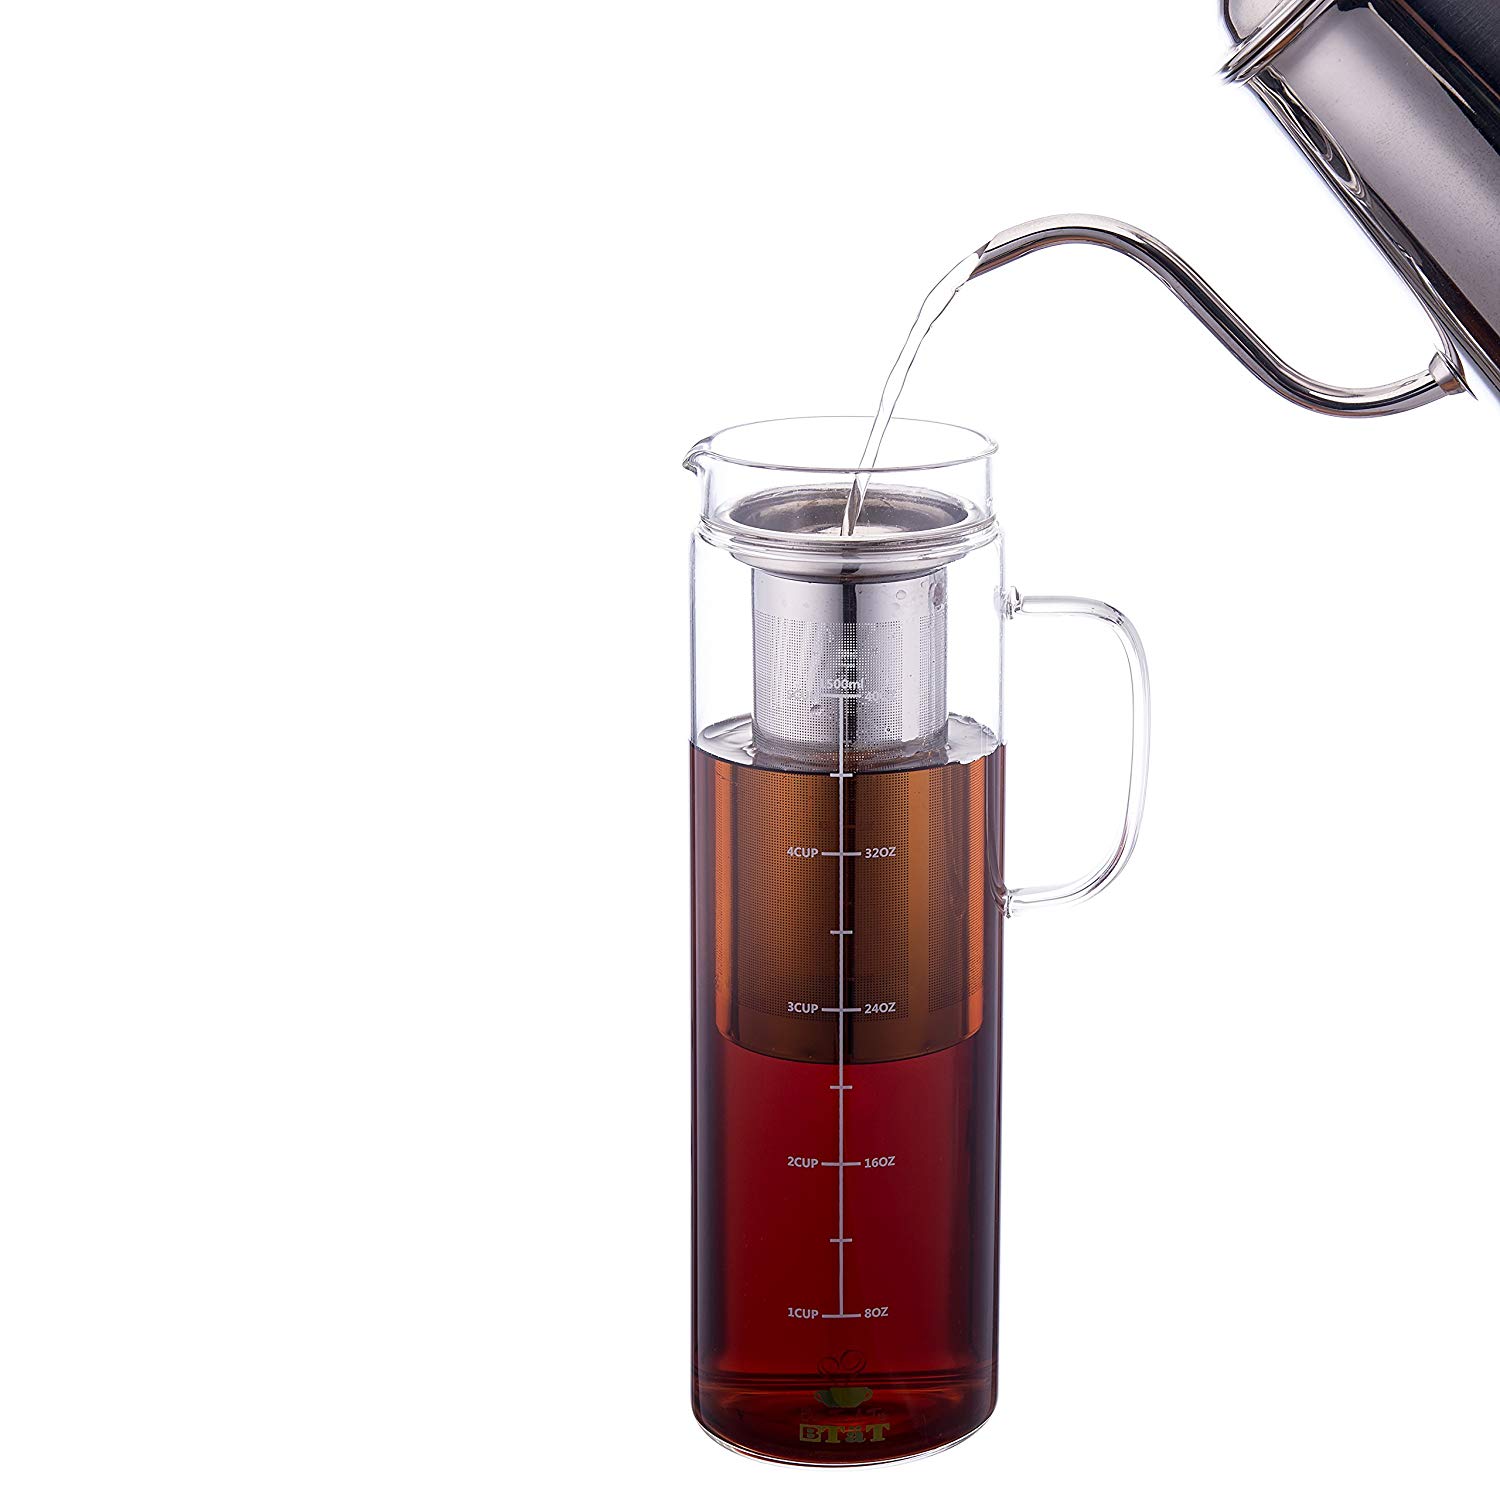 Cold Brew Coffee Maker & Tea Infuser Carafe by Integrity Chef - 5 Cup